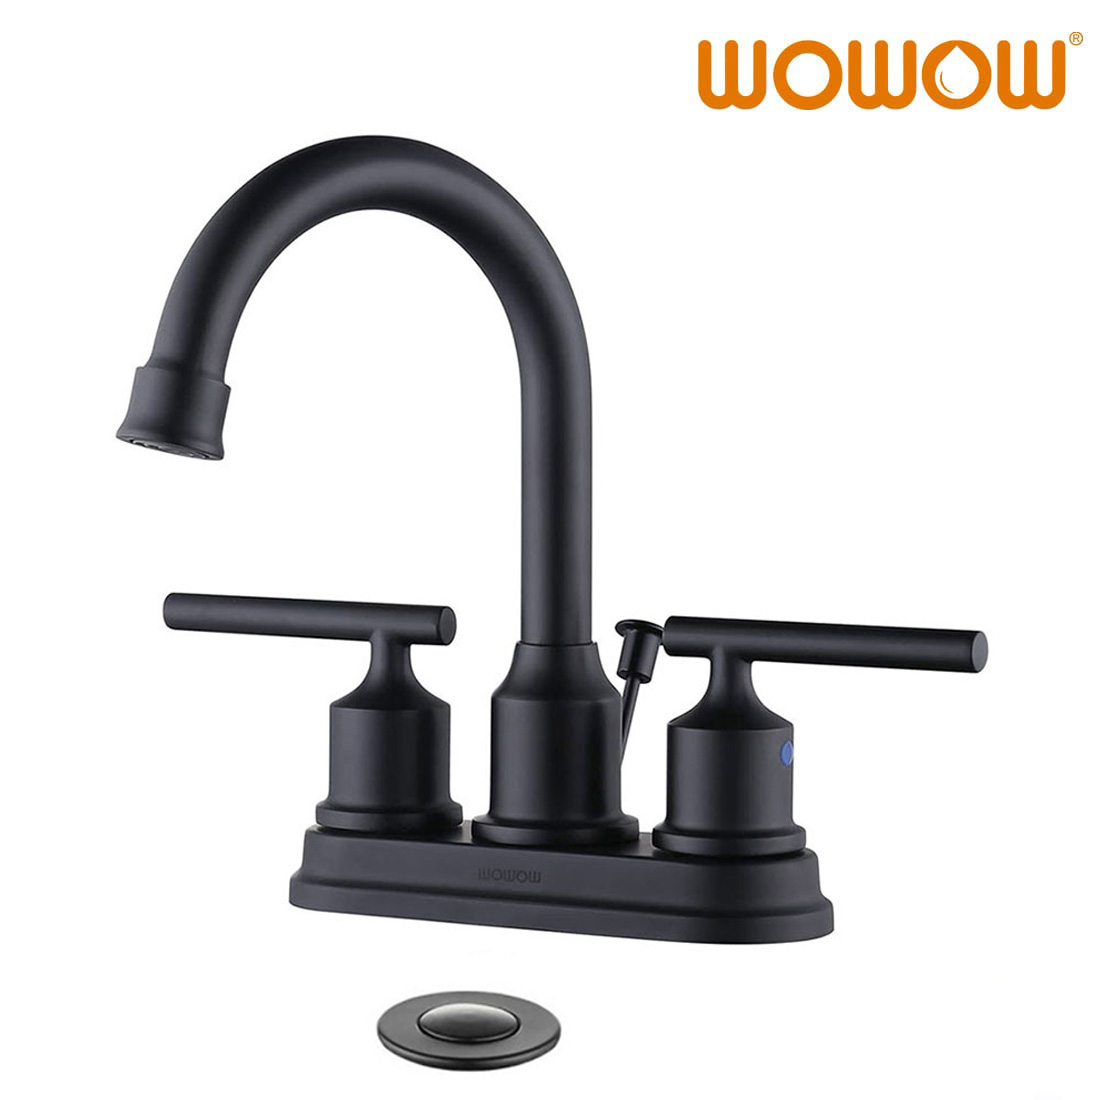 WOWOW Black Centerset Bathroom Faucet 2 Handle Bathroom Sink Faucet 4 Inch Basin Faucet 3 Hole Modern Vanity Faucet for RV Sink with Lift Rod Drain Stopper and Supply Hoses